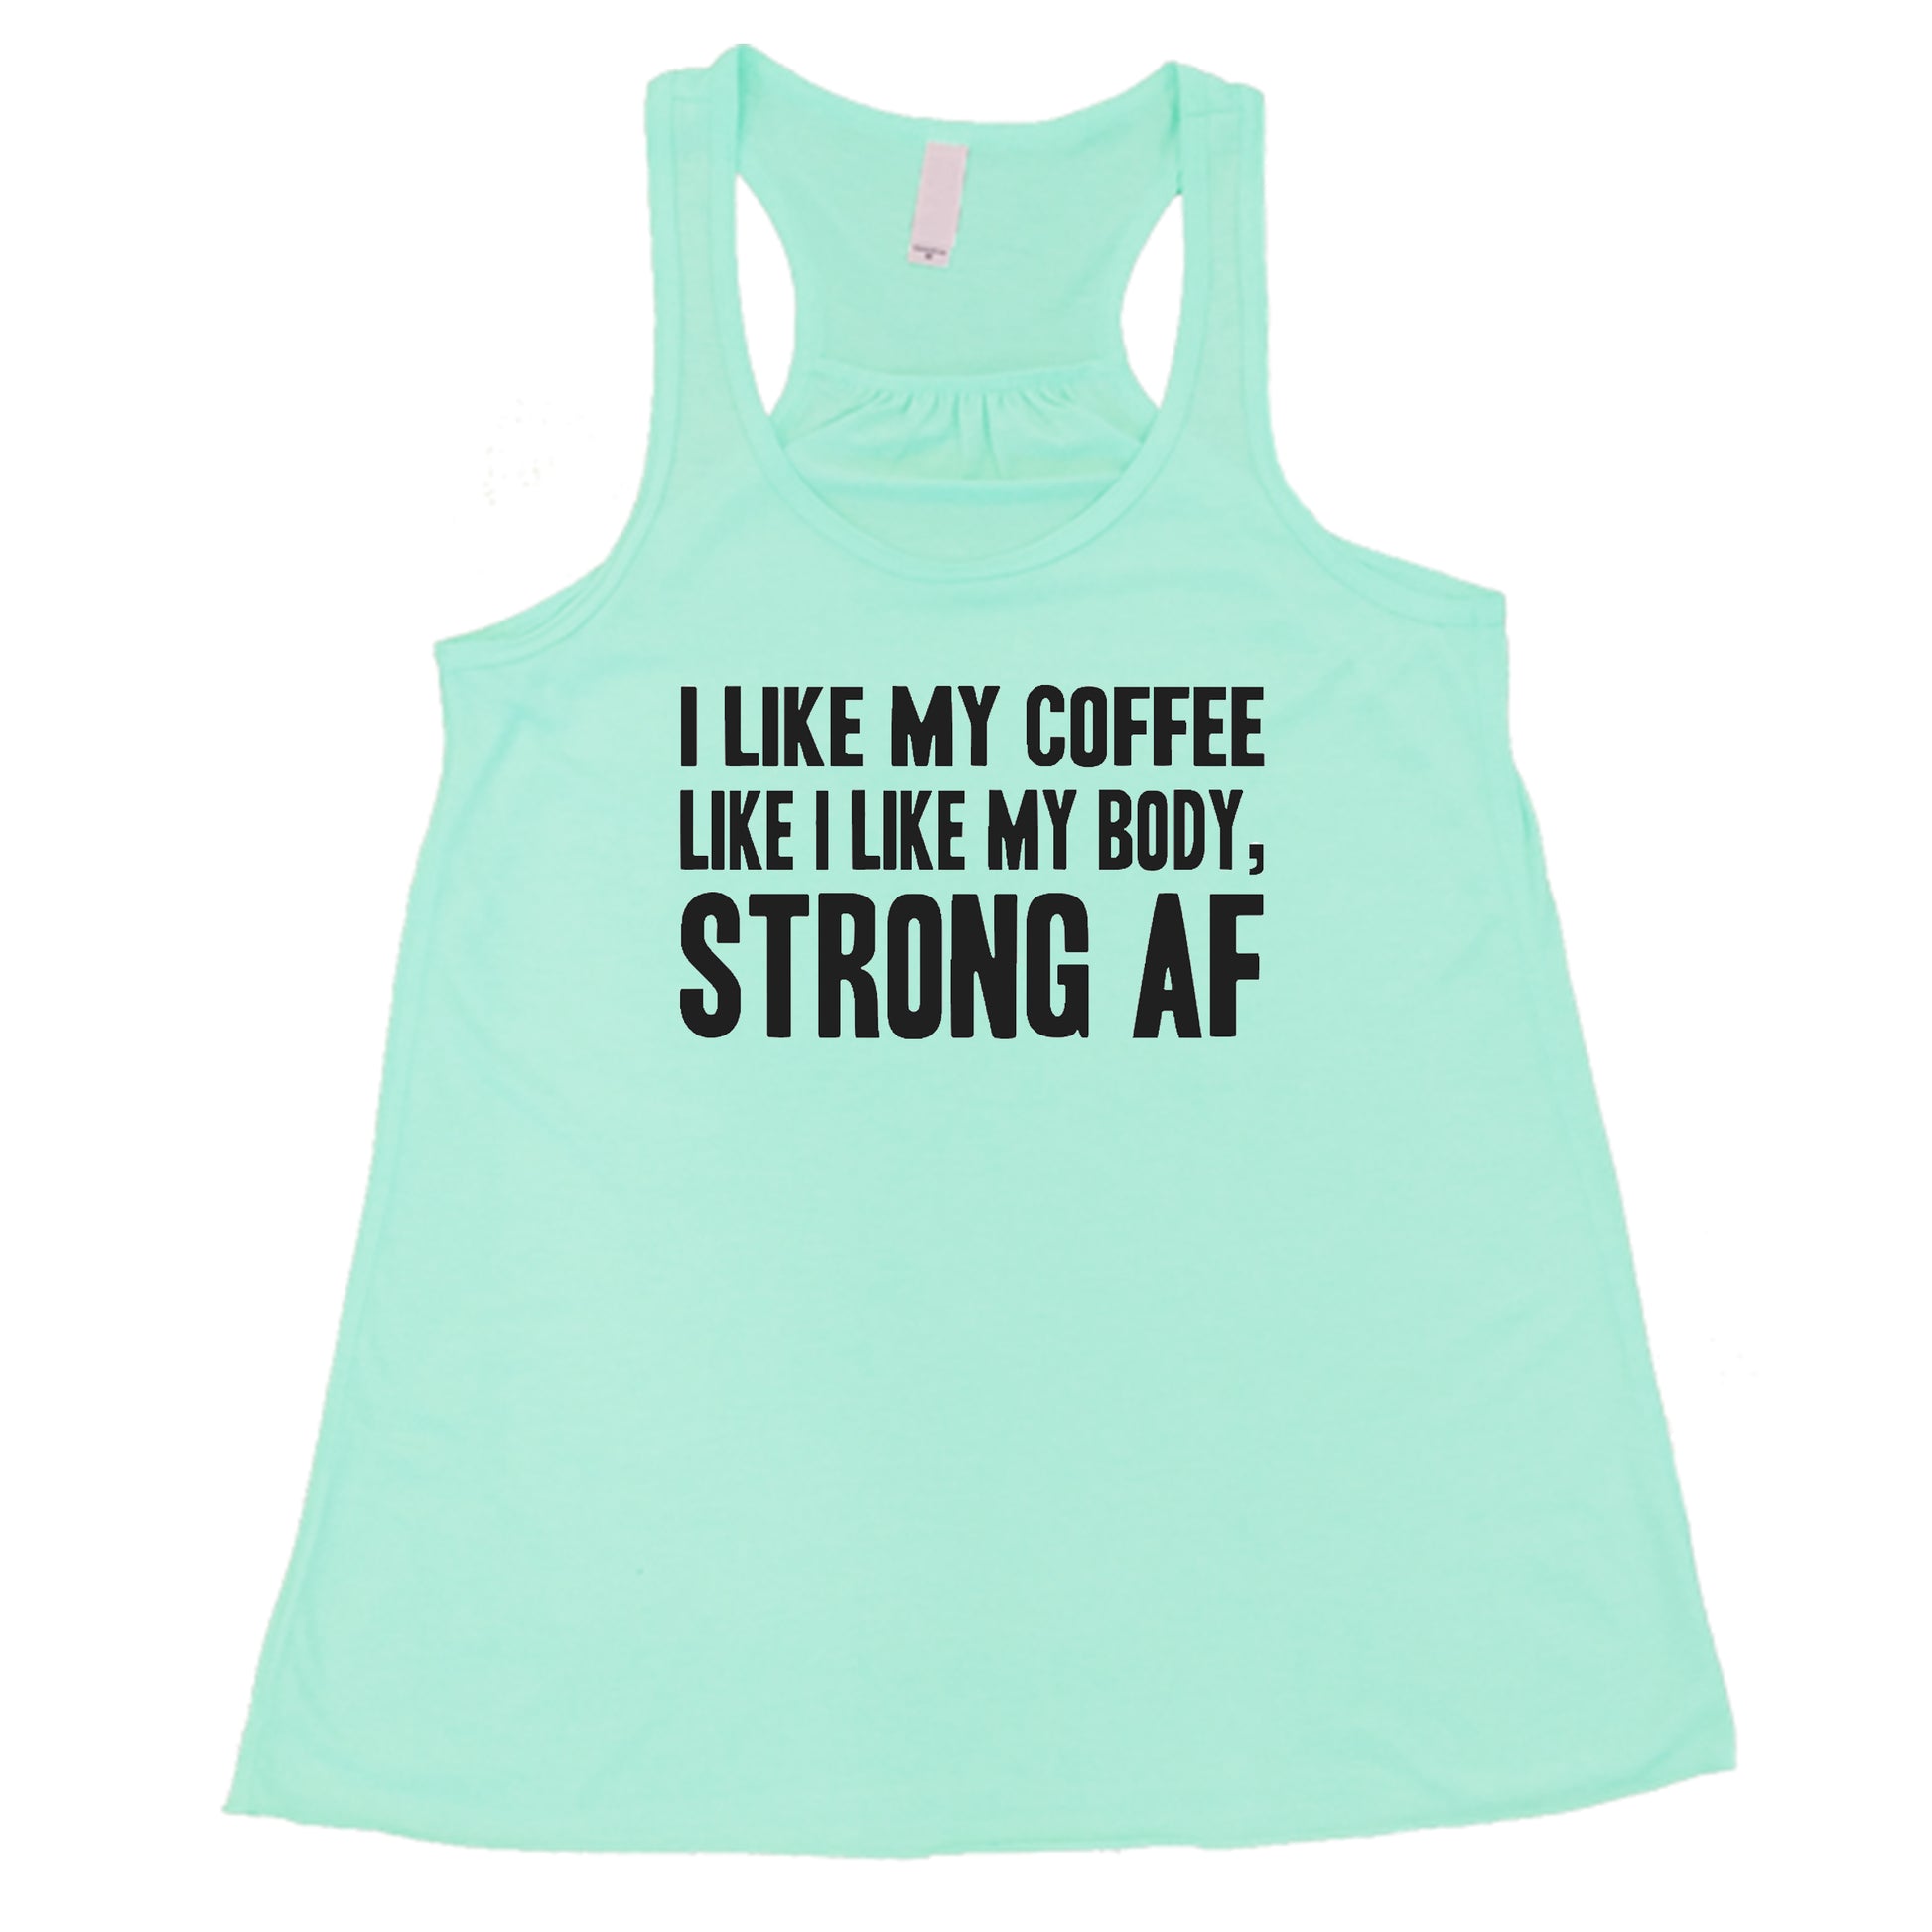 "I Like My Coffee Like I Like My Body Strong AF" quote in white lettering on teal racerback shirt